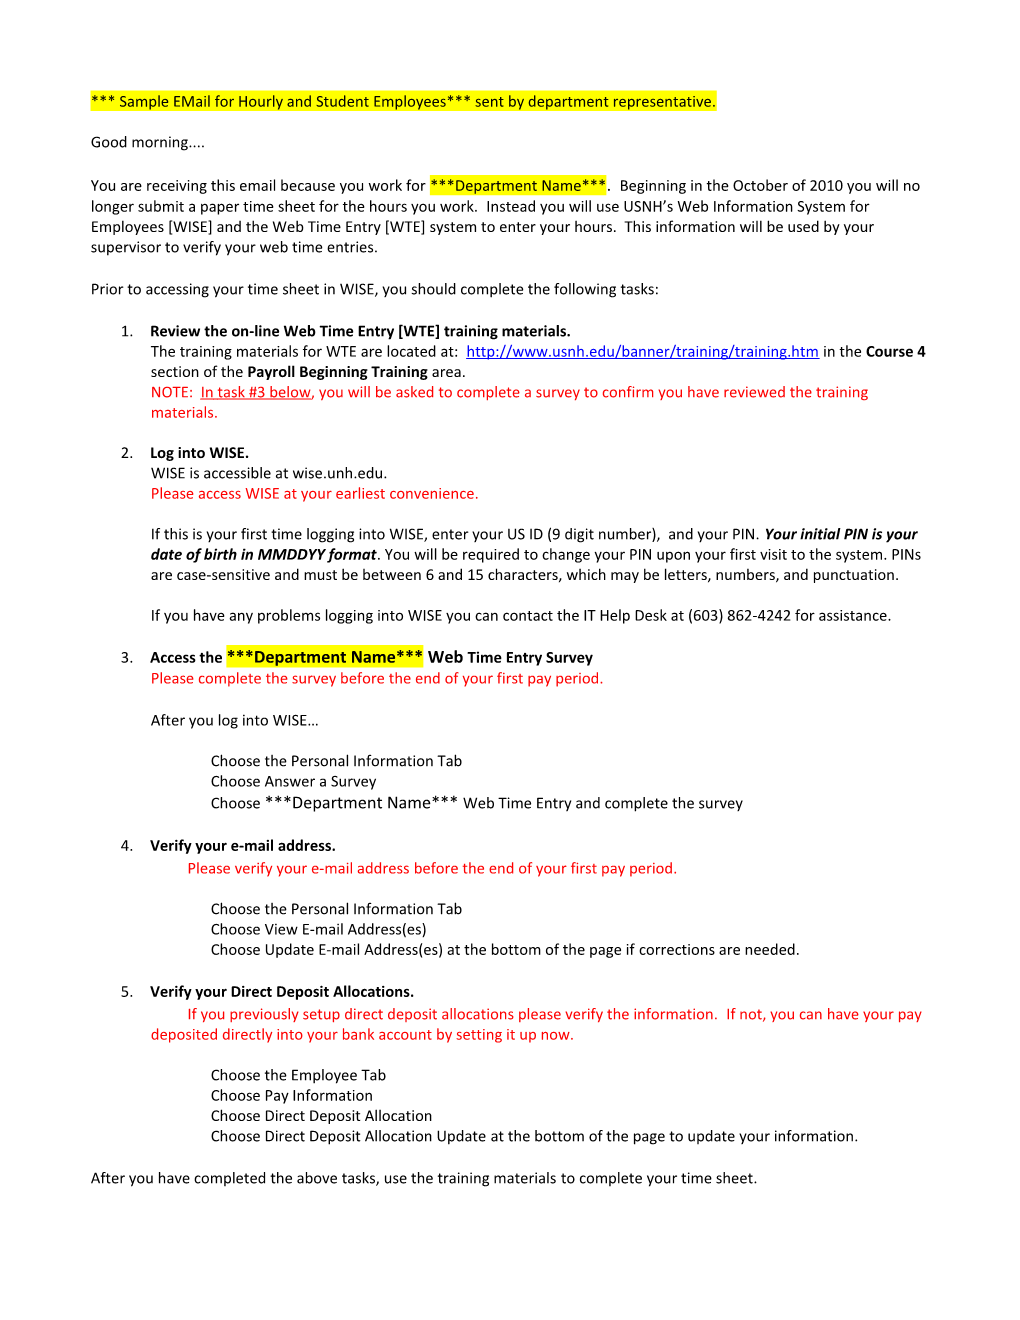 Sample Email for Hourly and Student Employees Sent by Department Representative